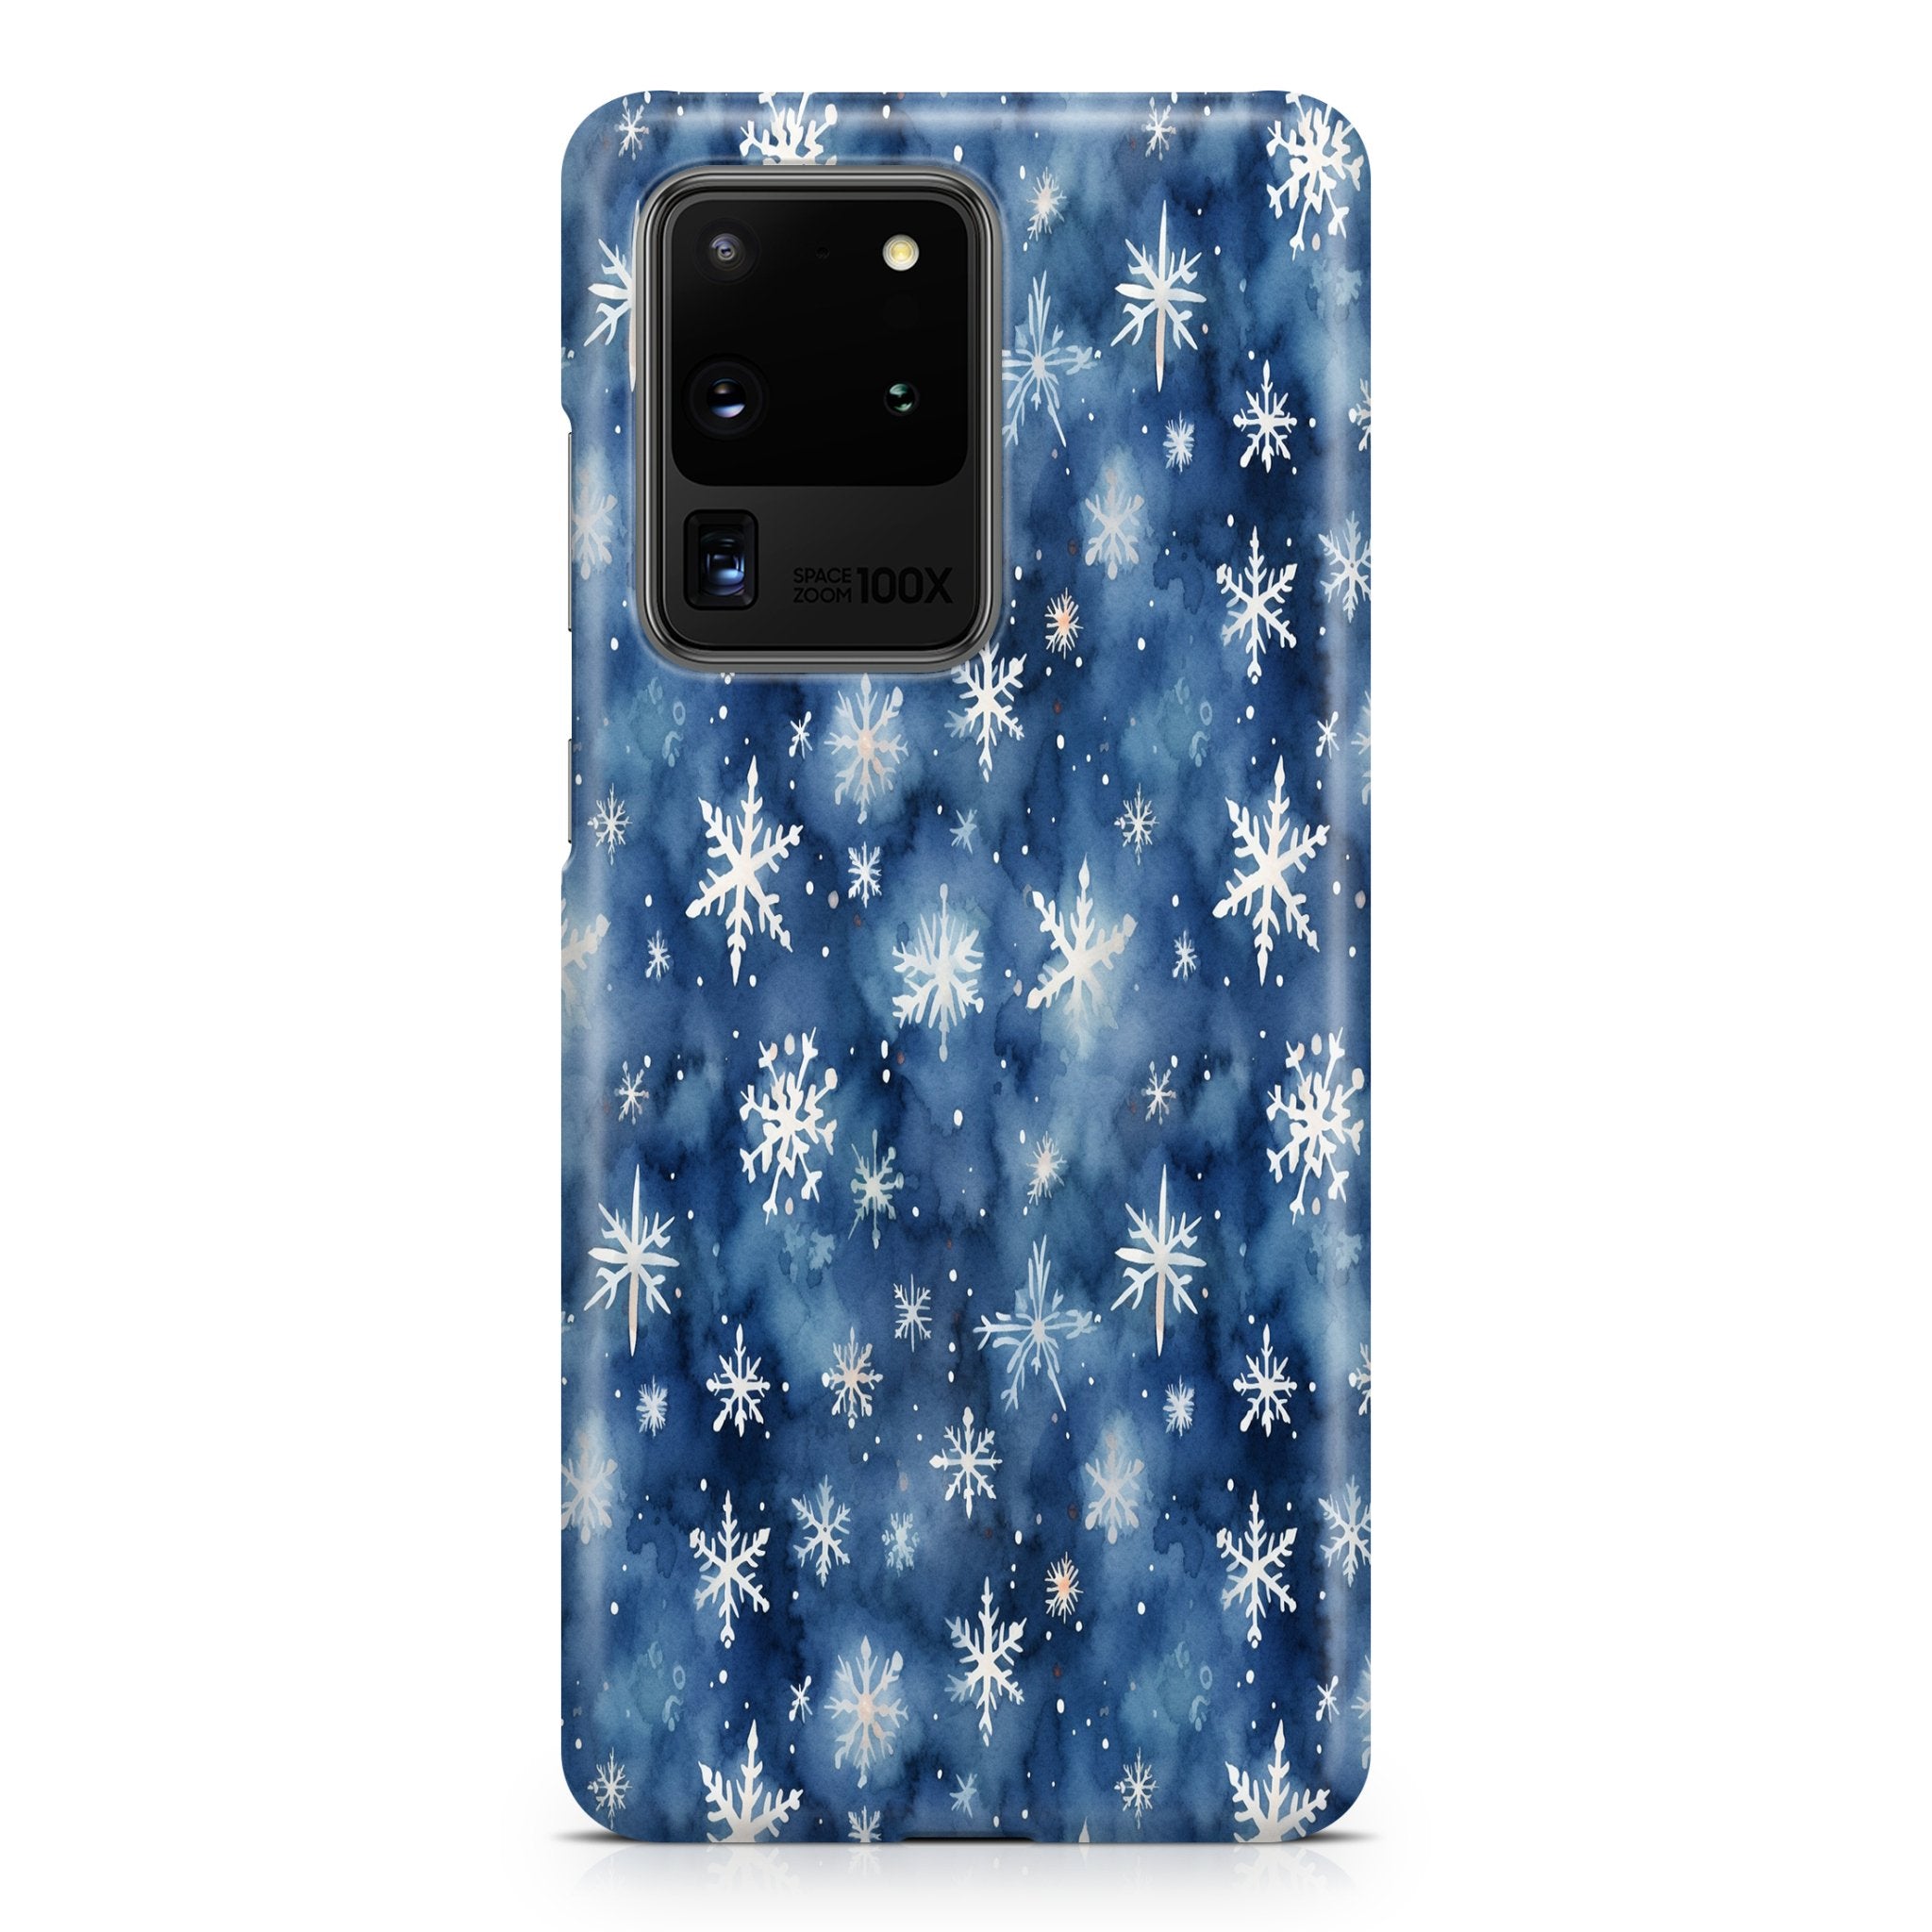 Winter Serenity - Samsung phone case designs by CaseSwagger